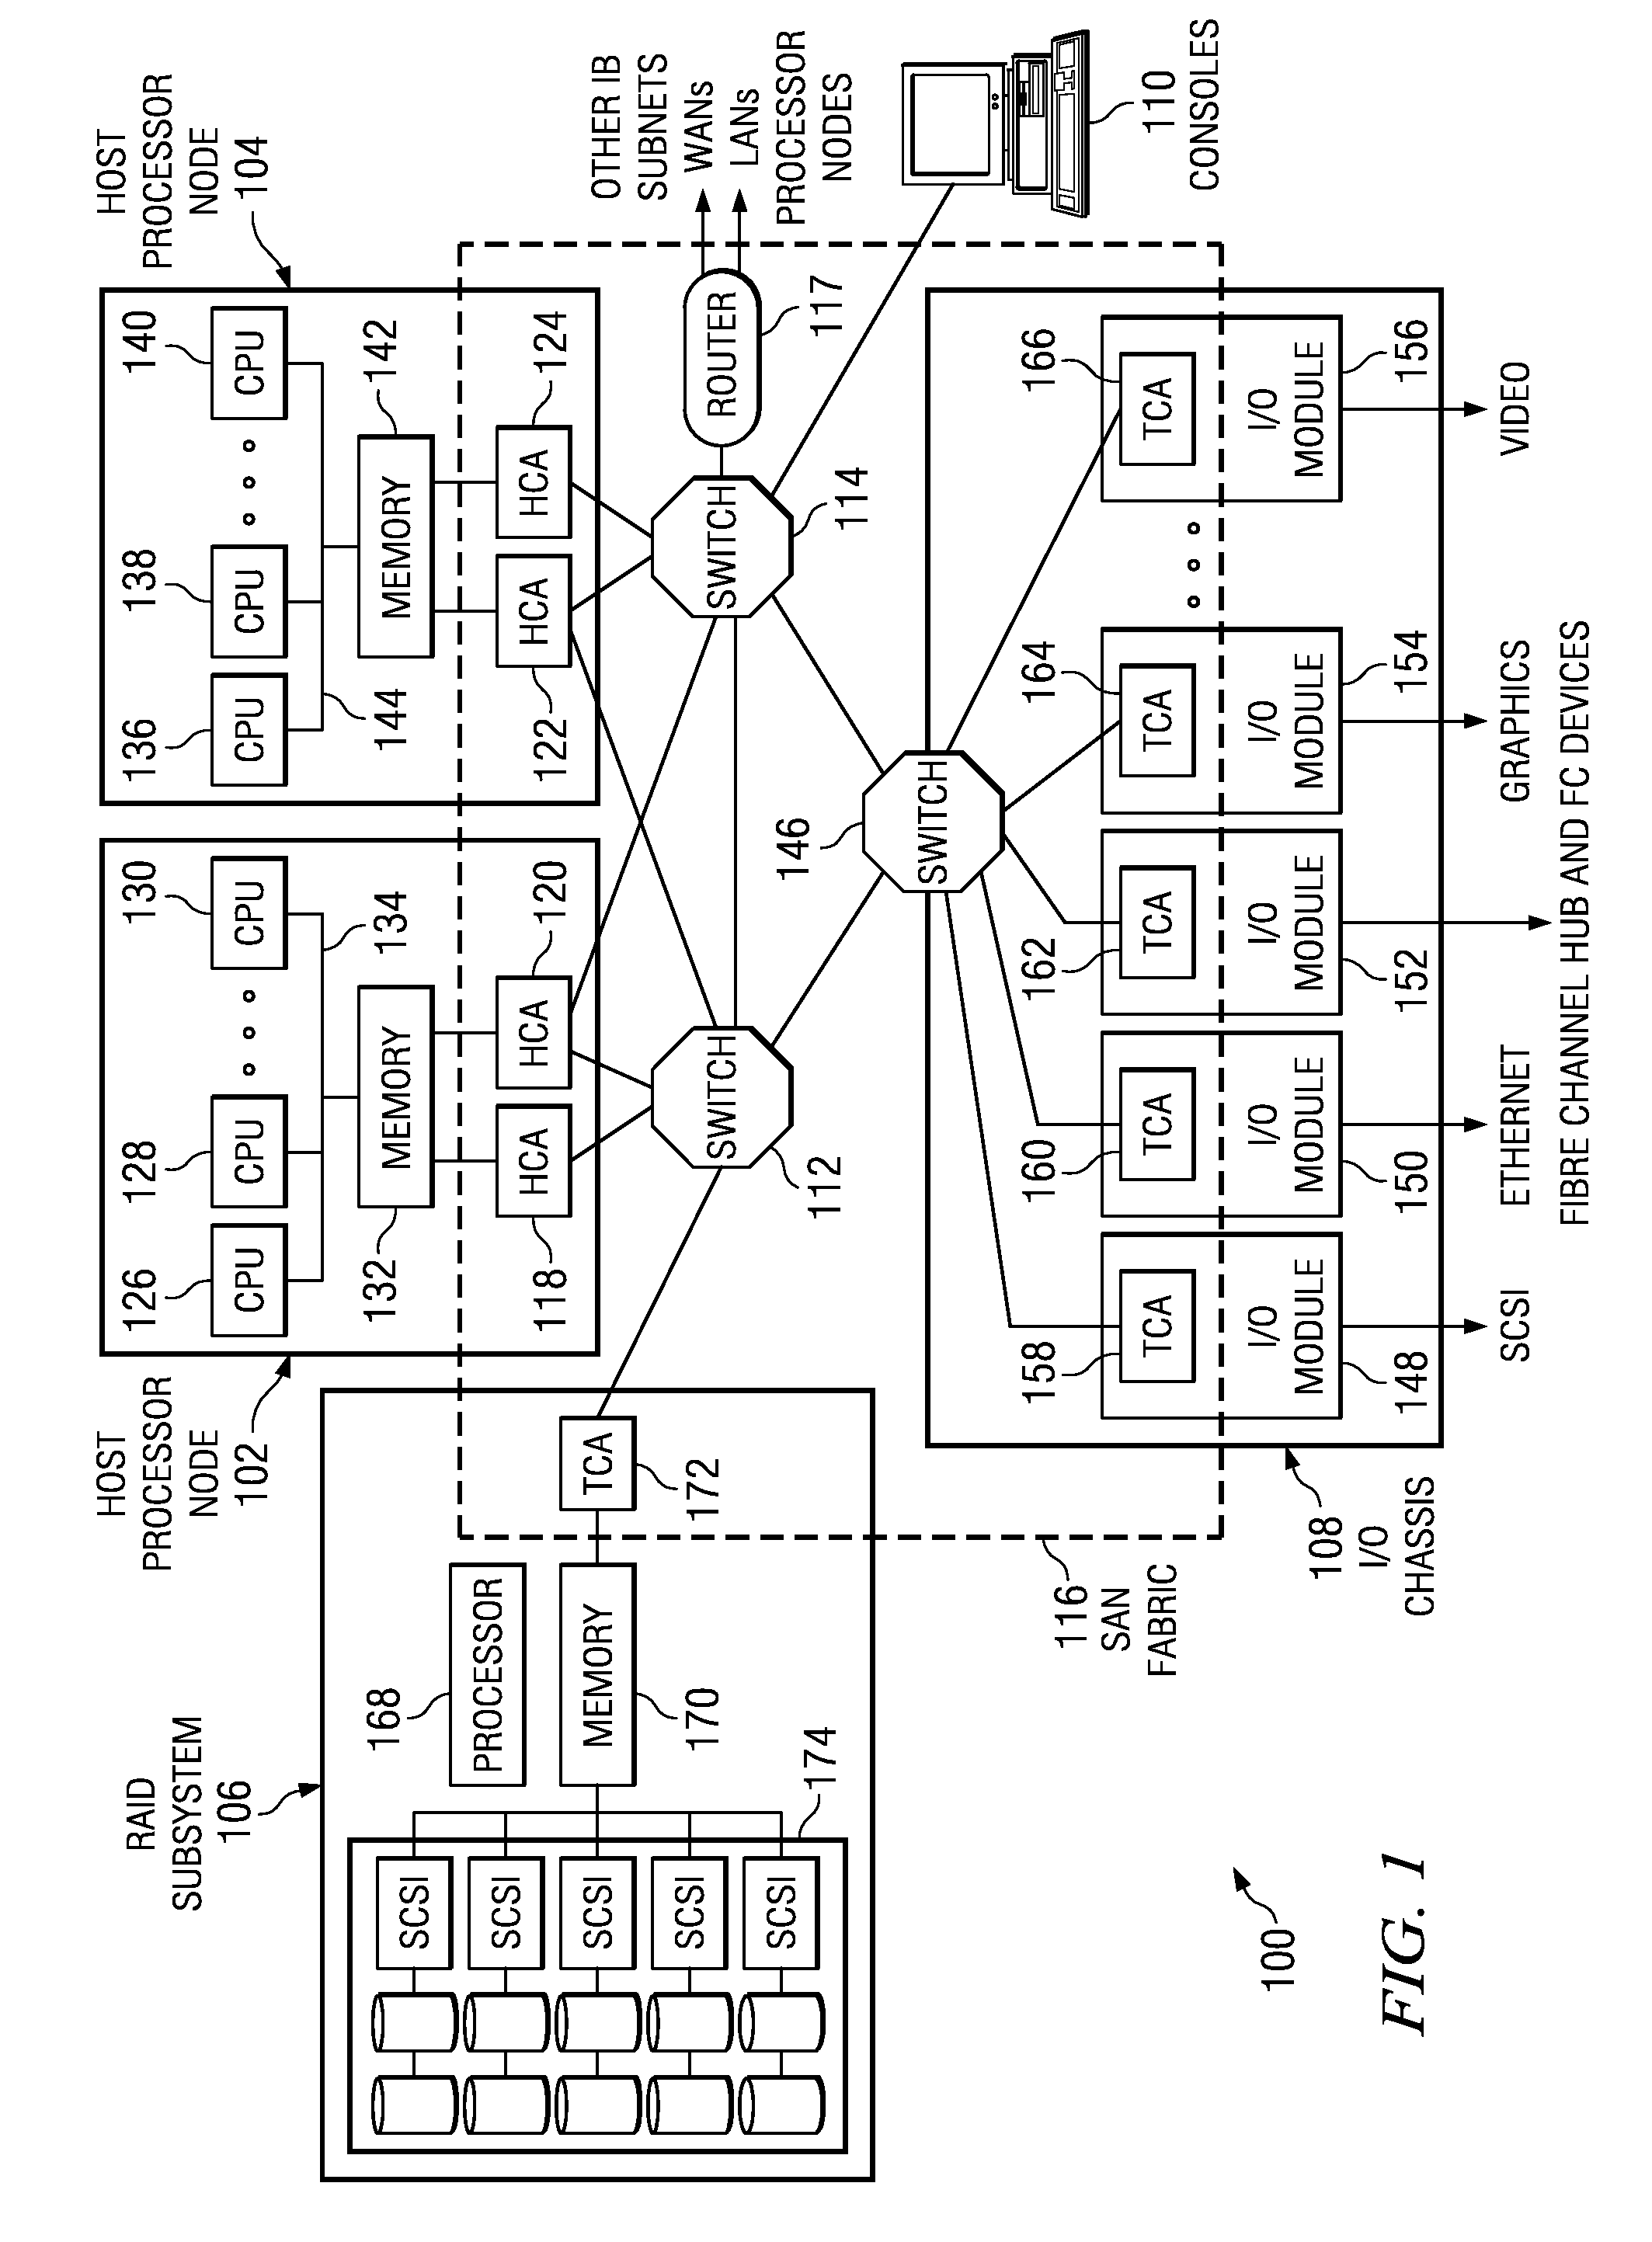 System and Method for Collective Send Operations on a System Area Network